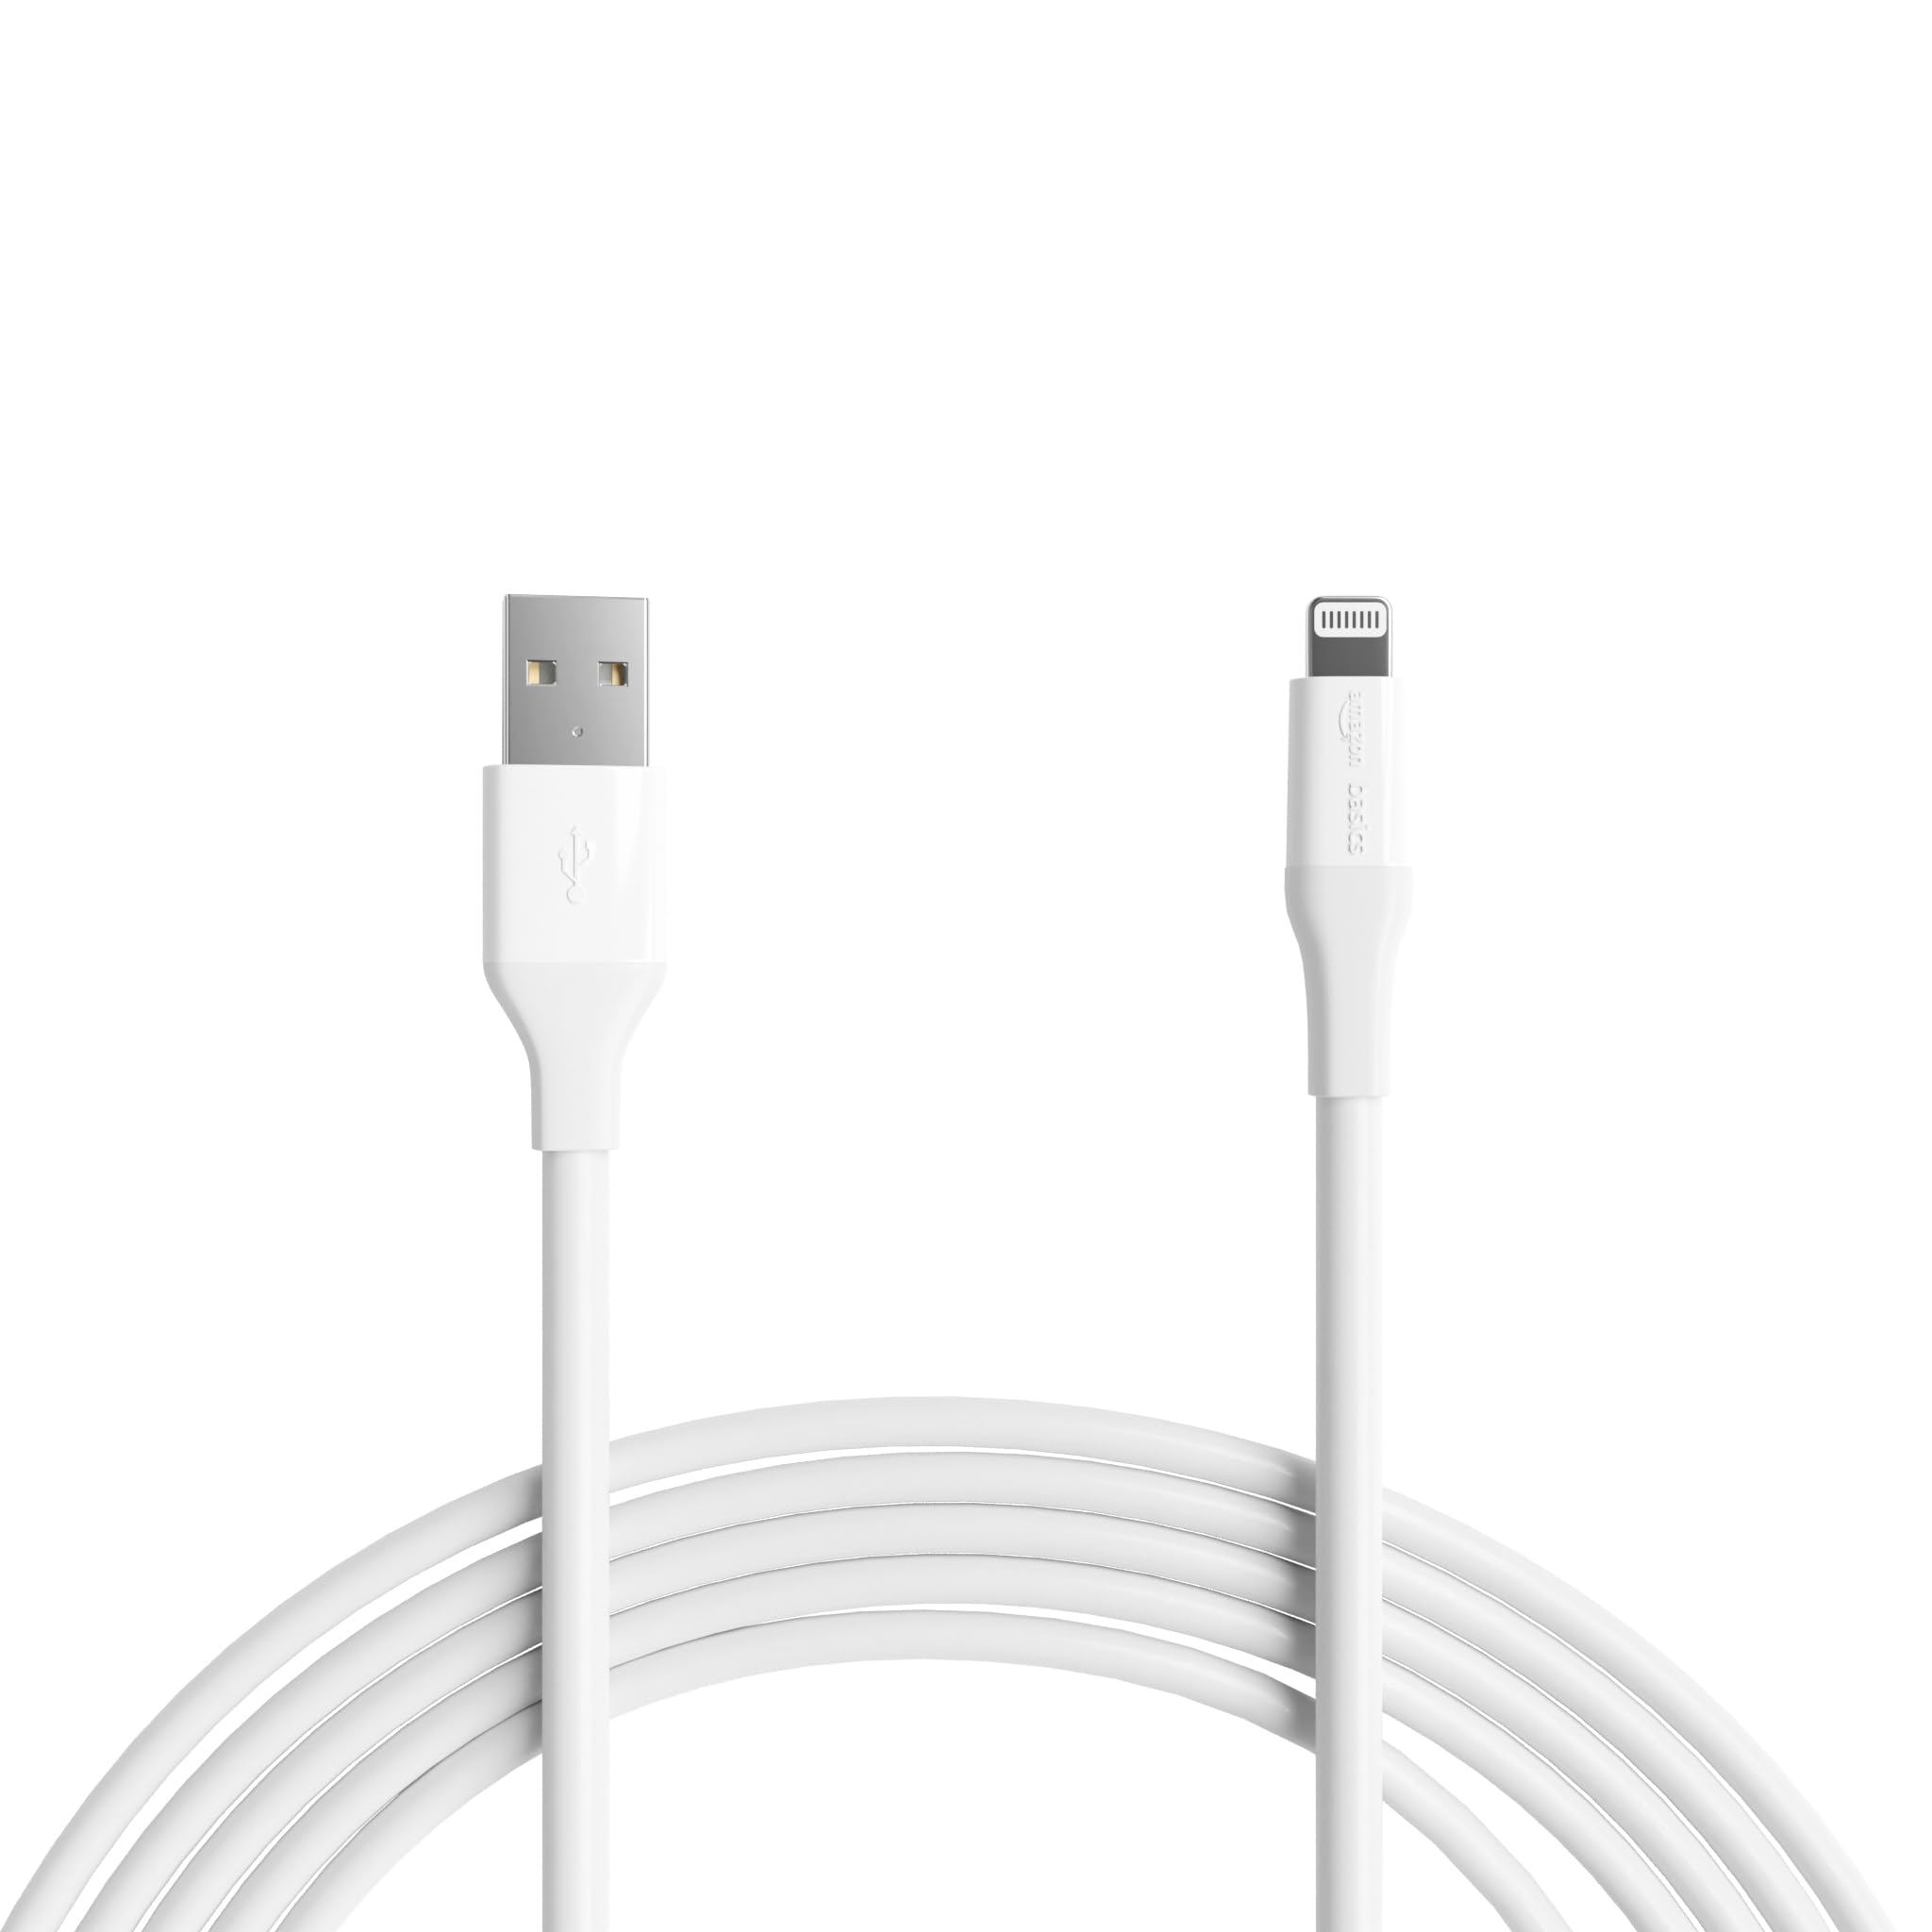 Amazon Basics Lightning to USB-A Cable for iPhone, 10 Feet, White